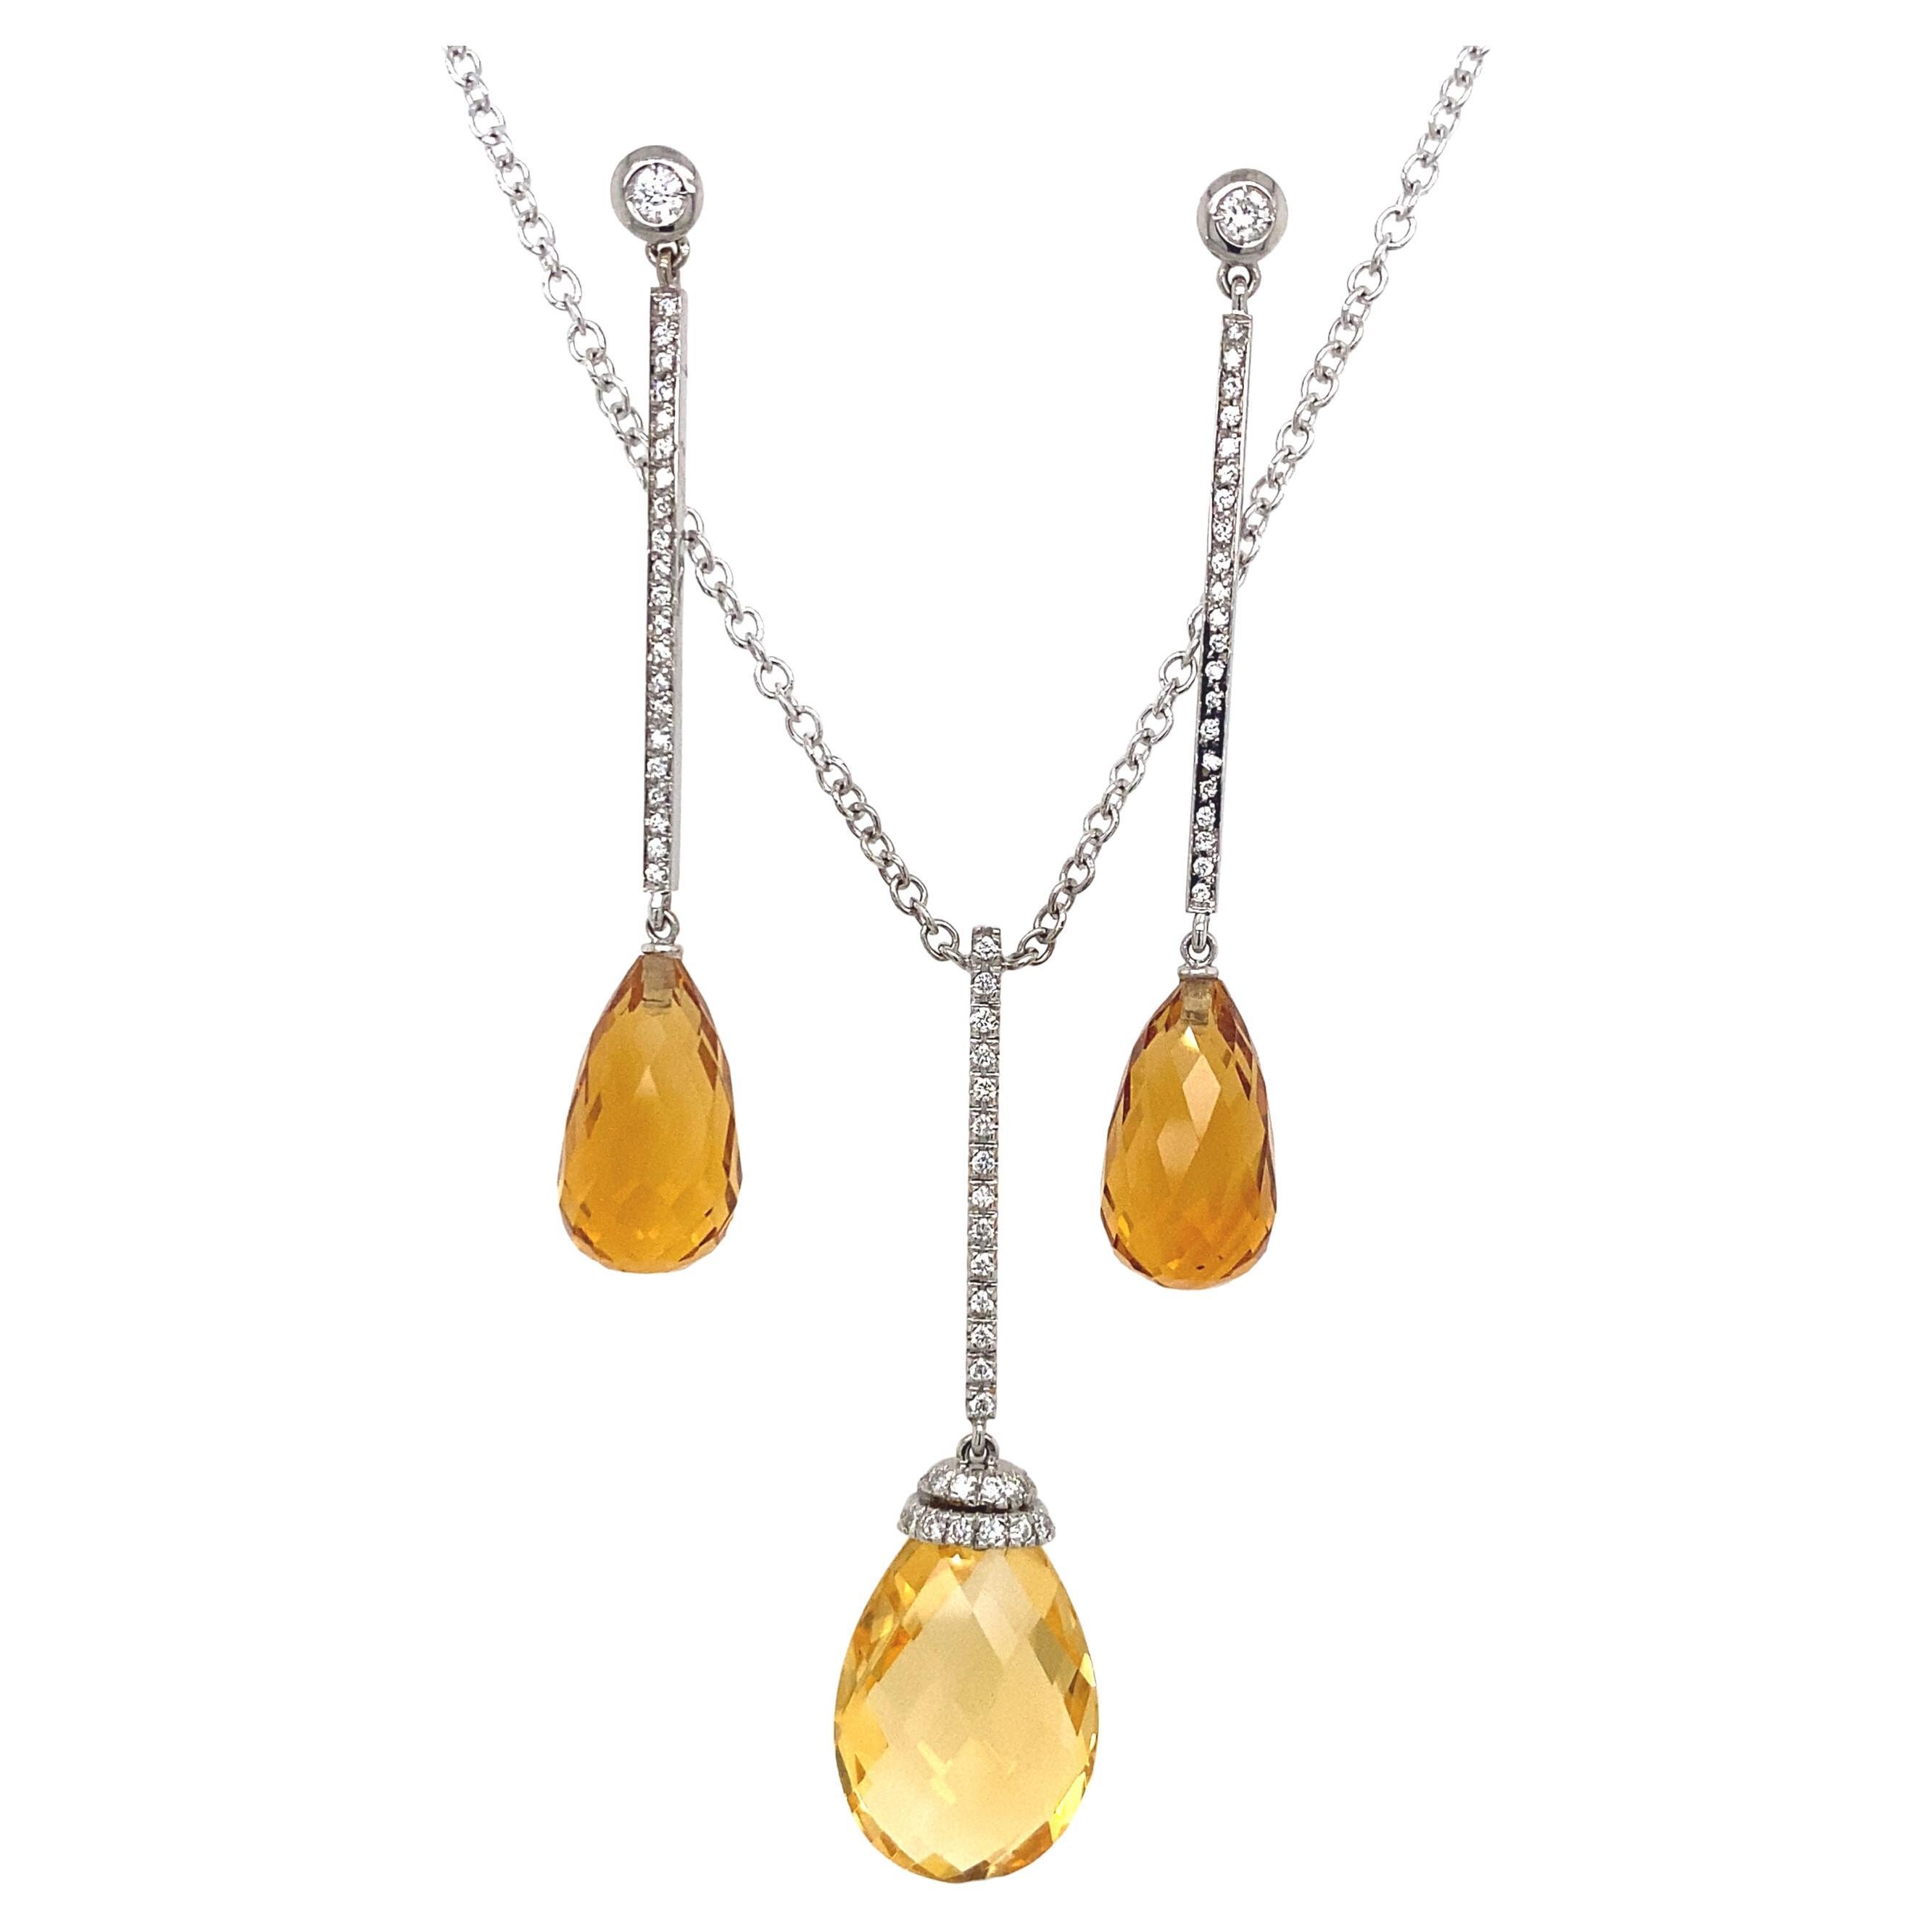 Matching Earrings & Necklace Set in 18ct White Gold with Citrines & Diamonds